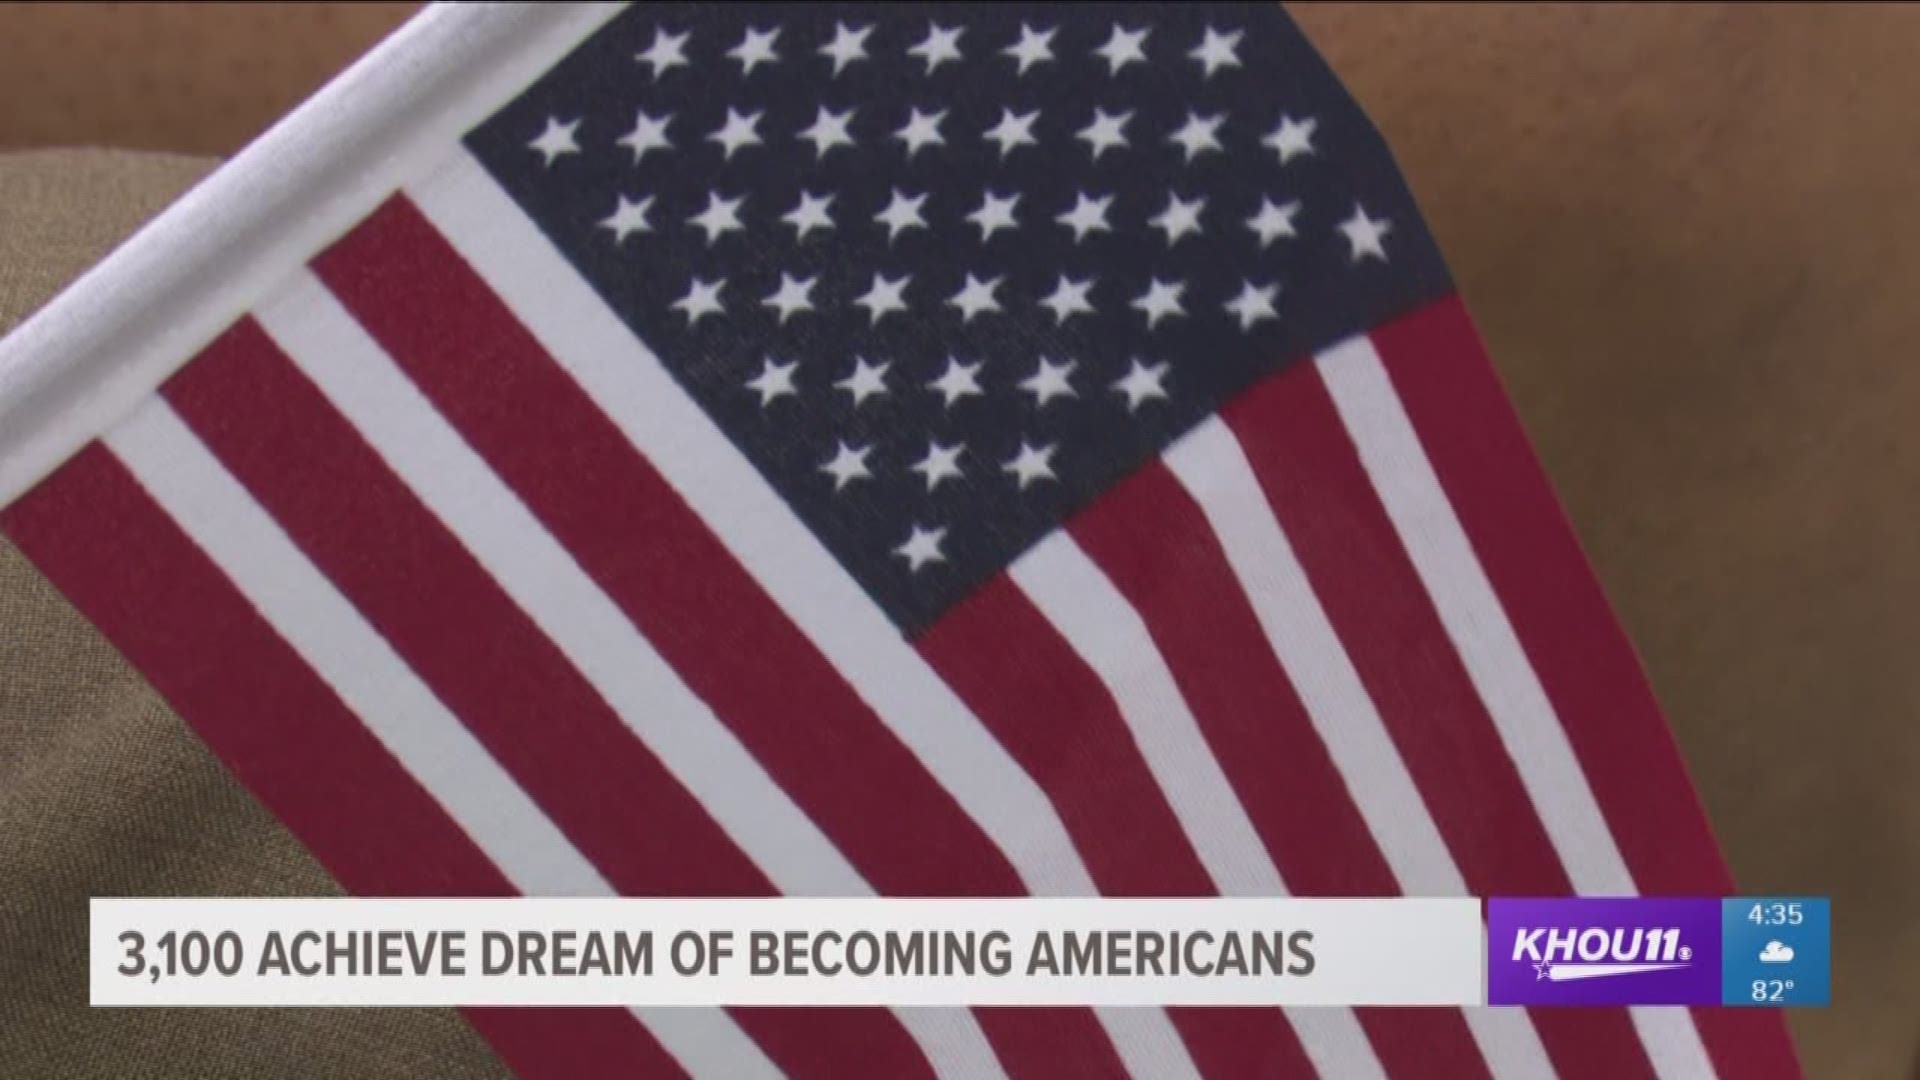 On Wednesday, more than 3,000 people achieved the American Dream in Houston by becoming U.S. citizens. 